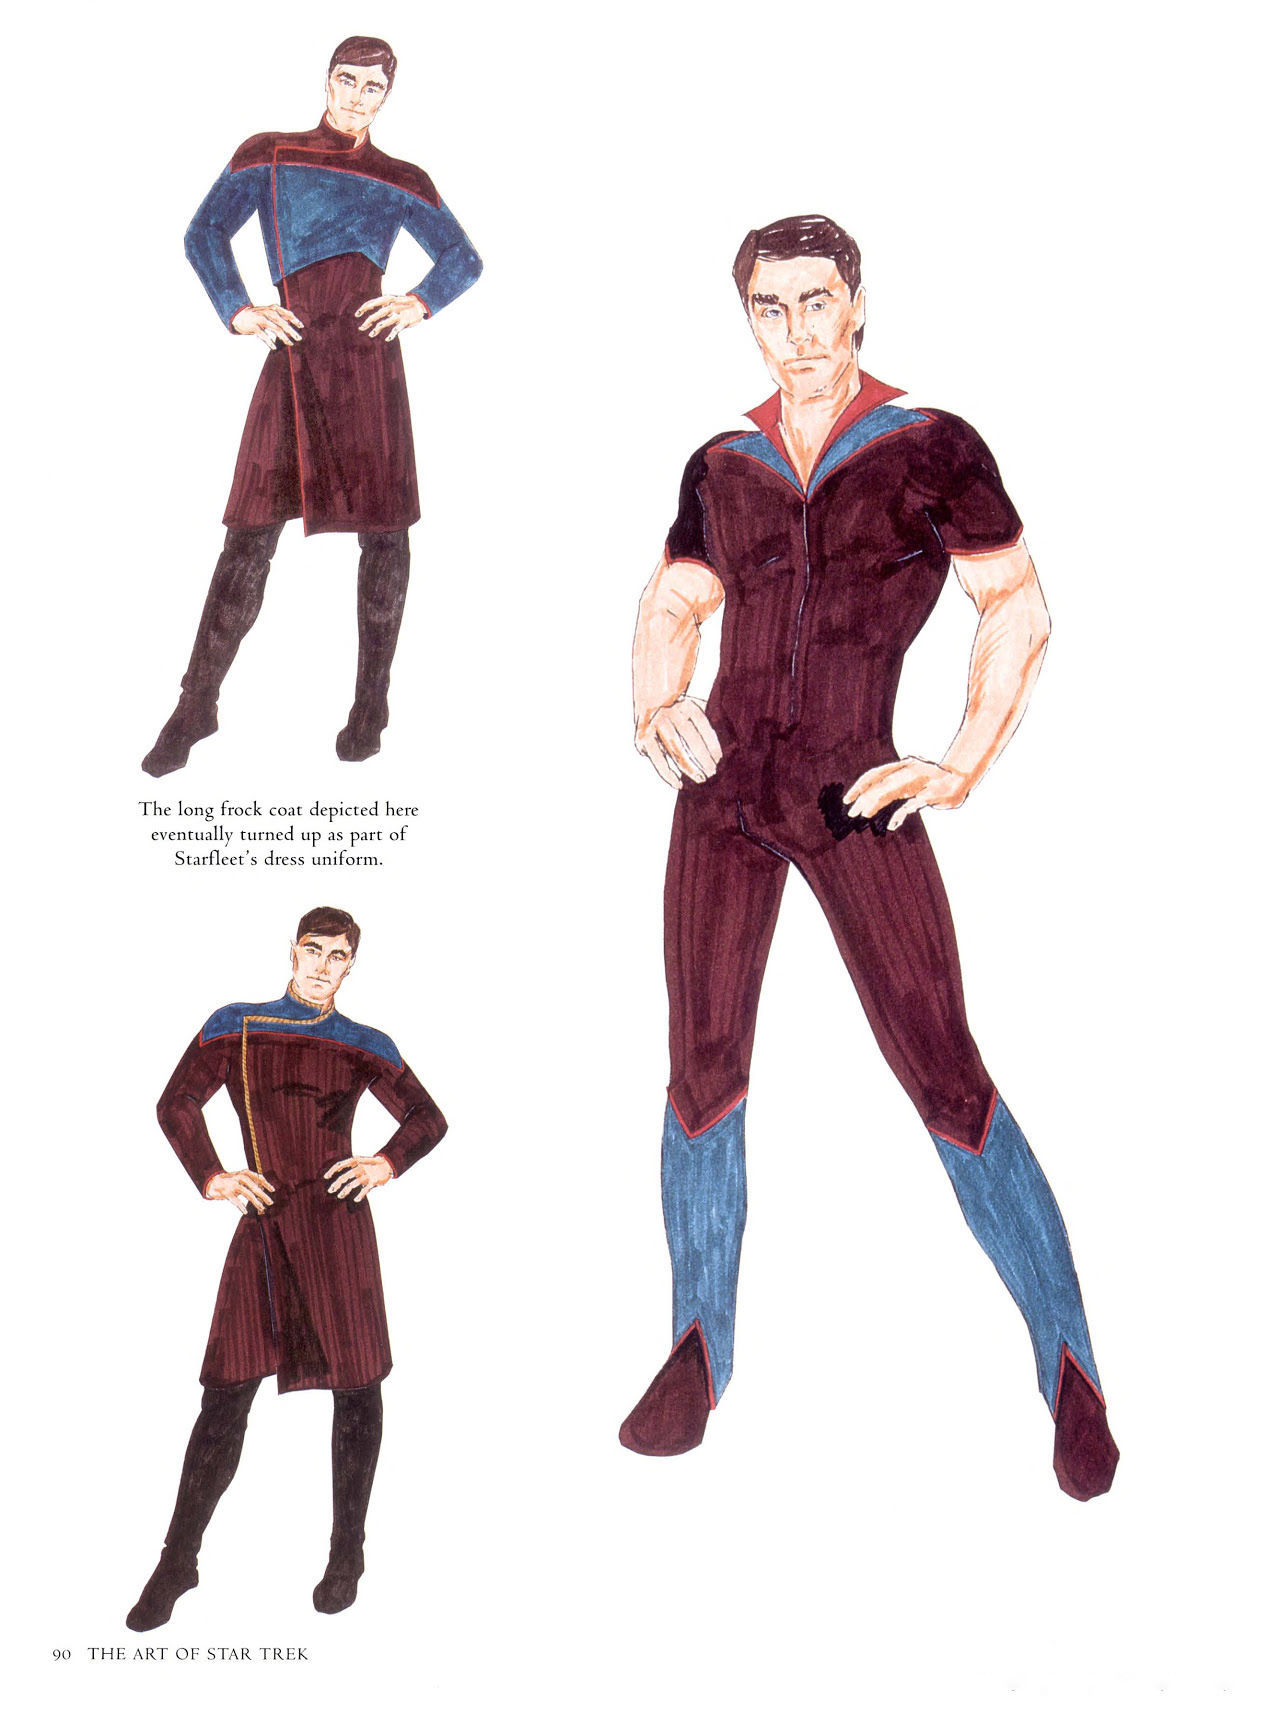 stra-tek:If you don’t know, you should know: These are William Ware Theiss’ original uniform designs for Star Trek: The Next Generation (The Art of Star Trek by Judith and Garfield Reeves-Stevens, 1997)